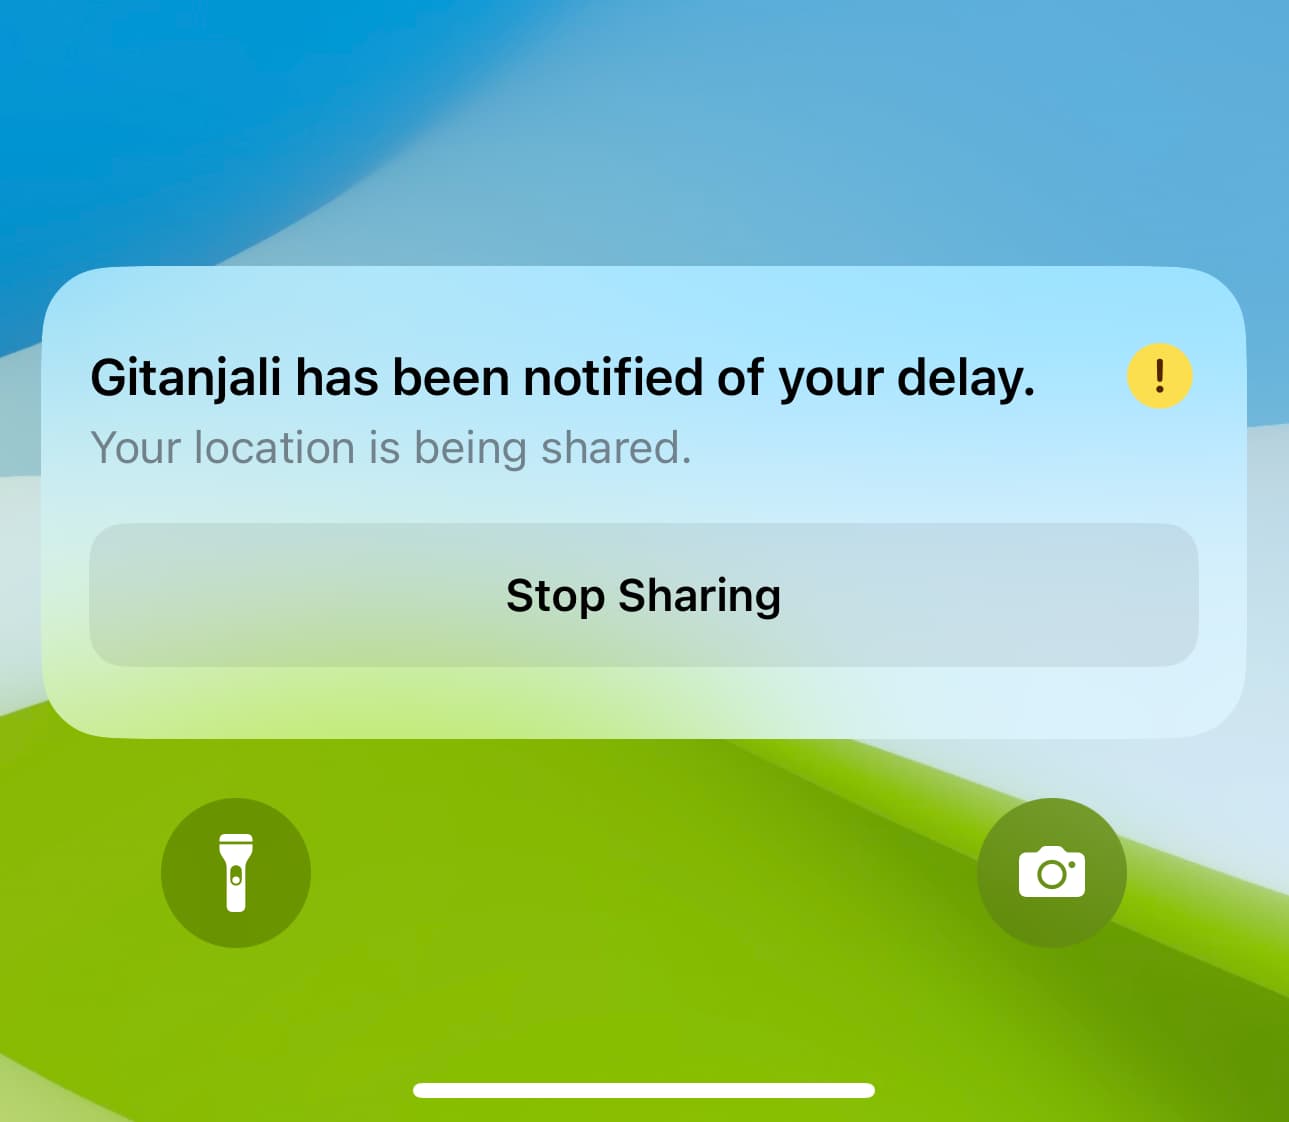 Check In has notified of your delay